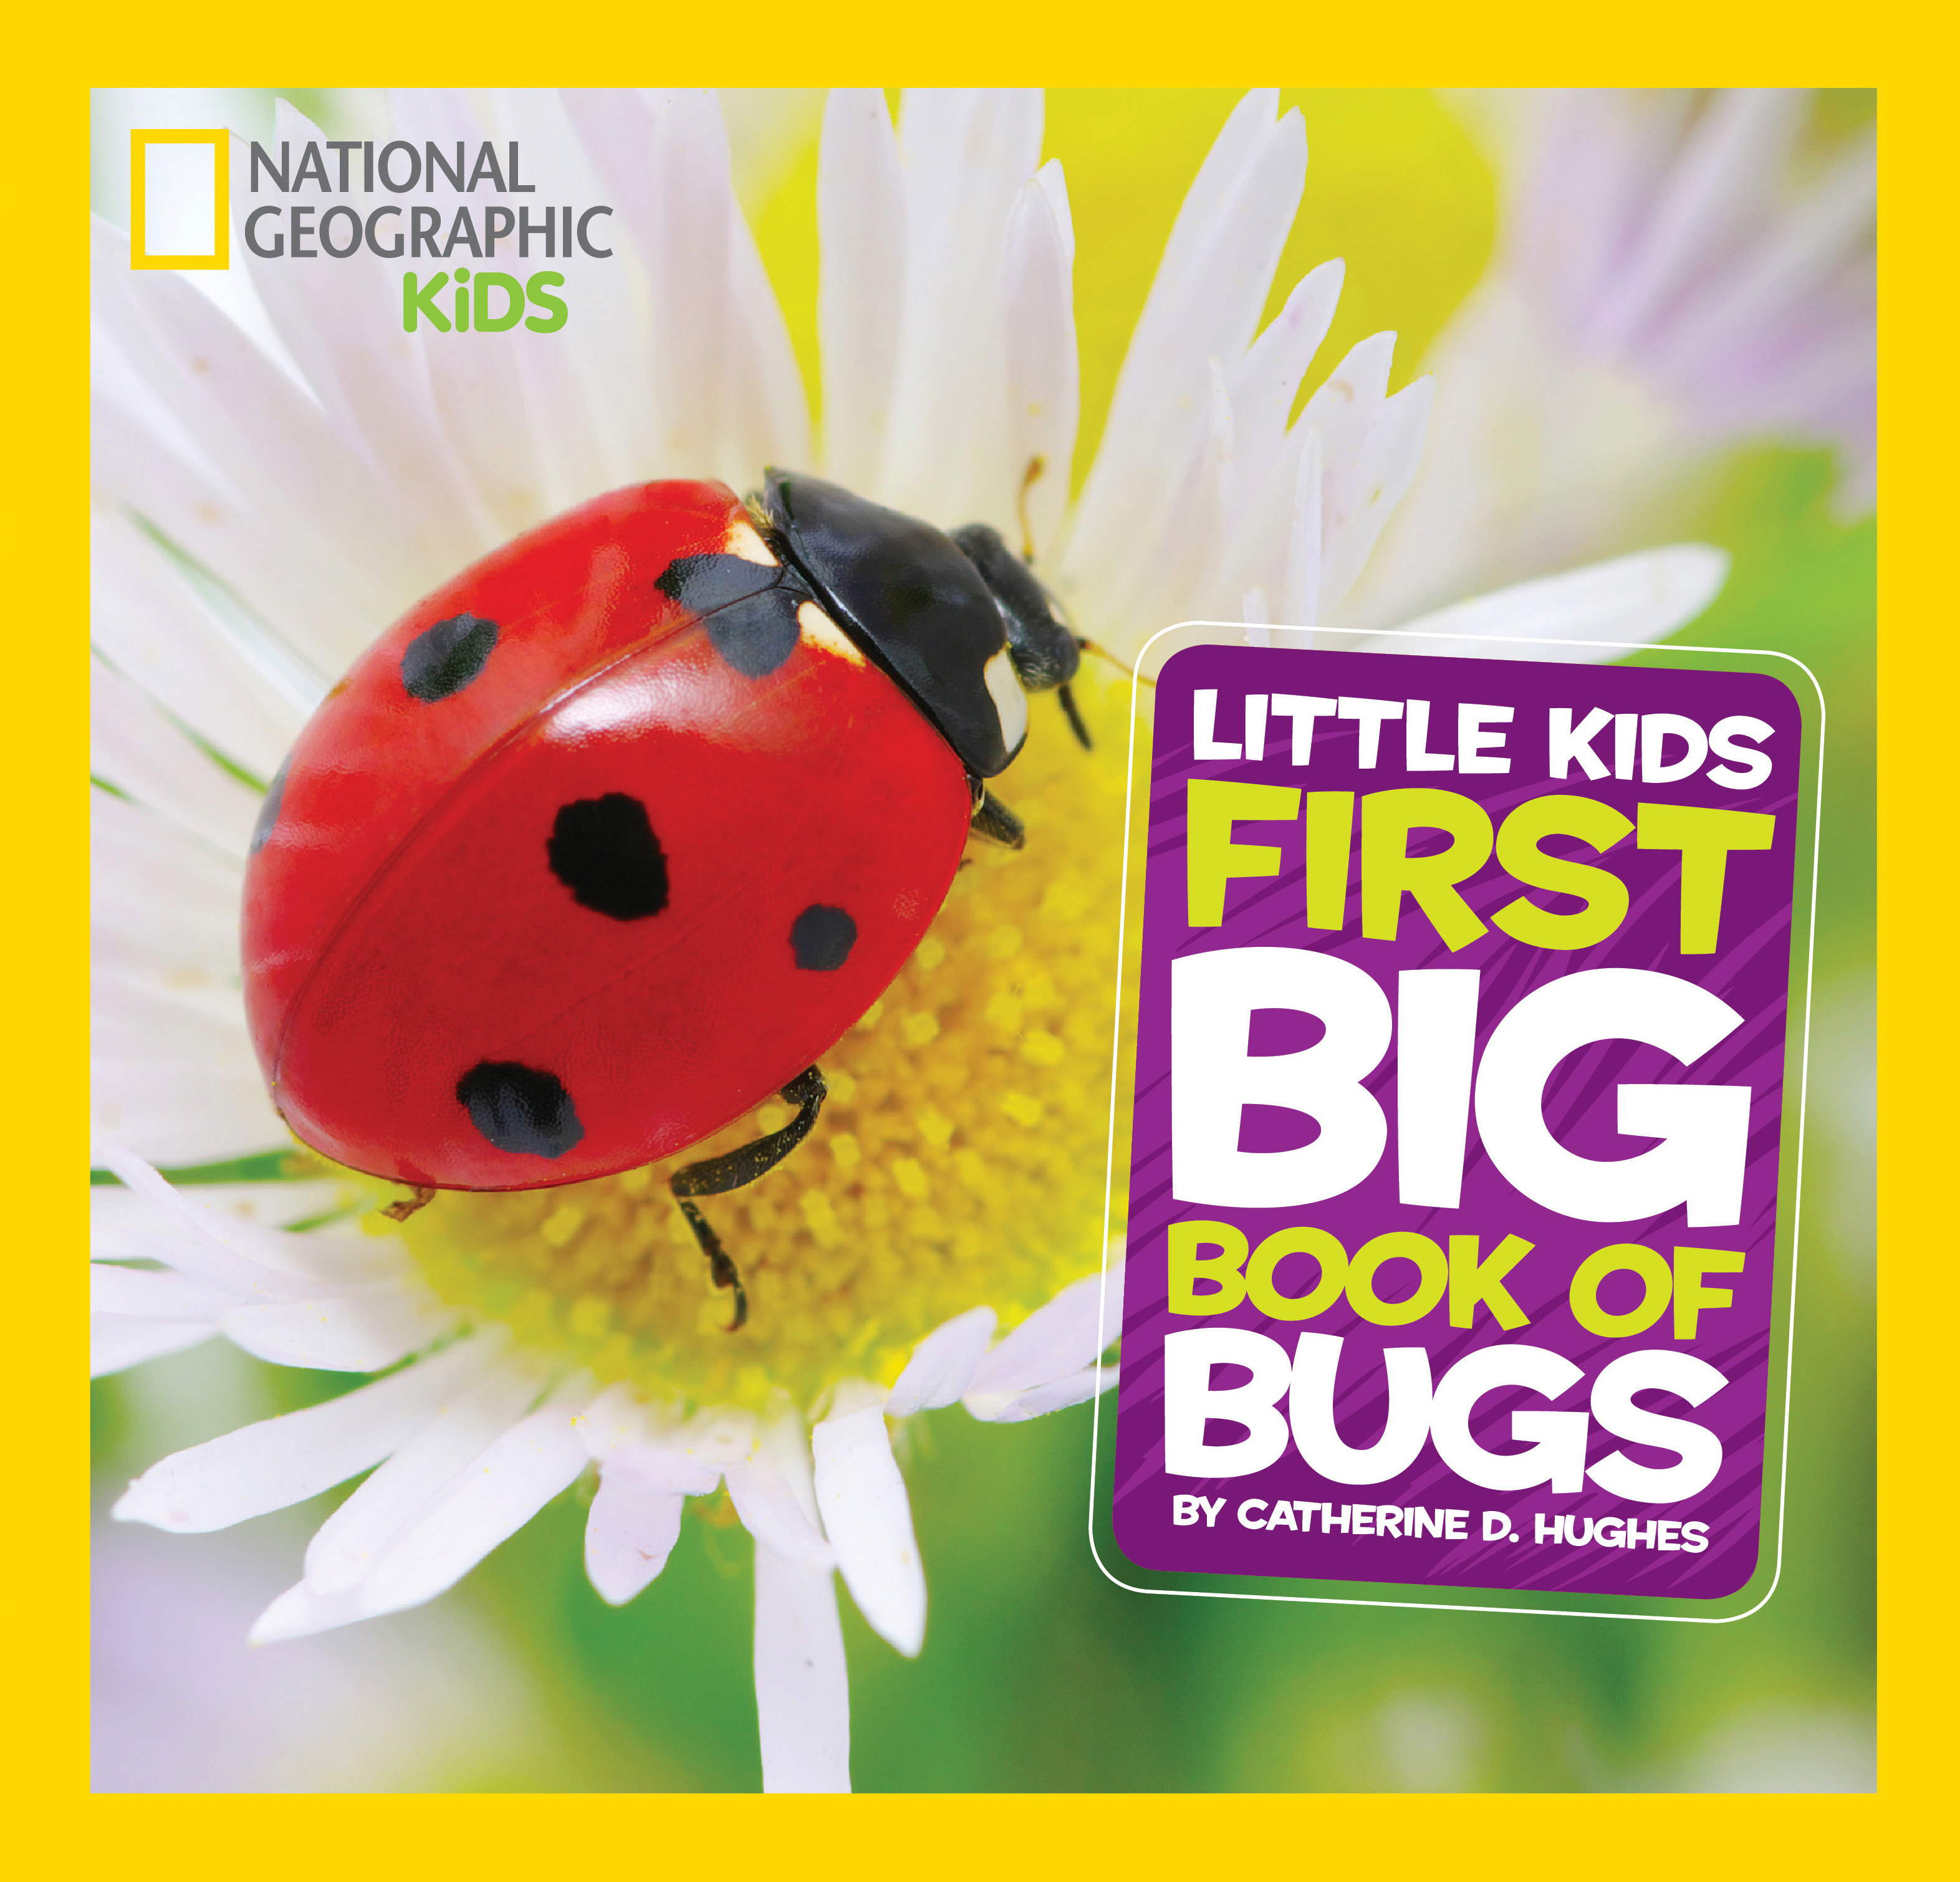 National Geographic Little Kids First Big Book Of Bugs (Hardcover Book)